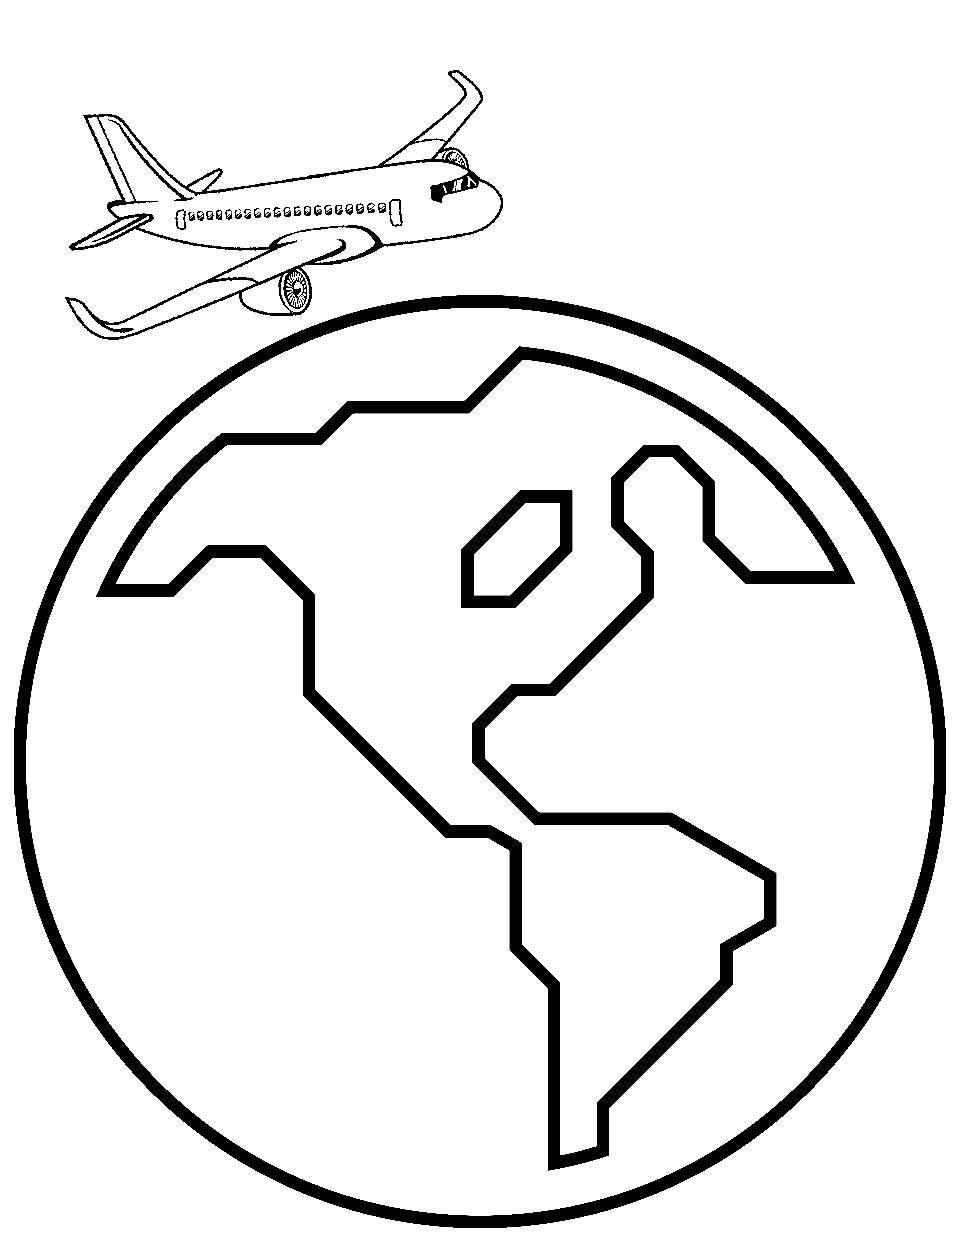 International Flight Airplane Coloring Page - A large airplane flying over the globe for international travel.